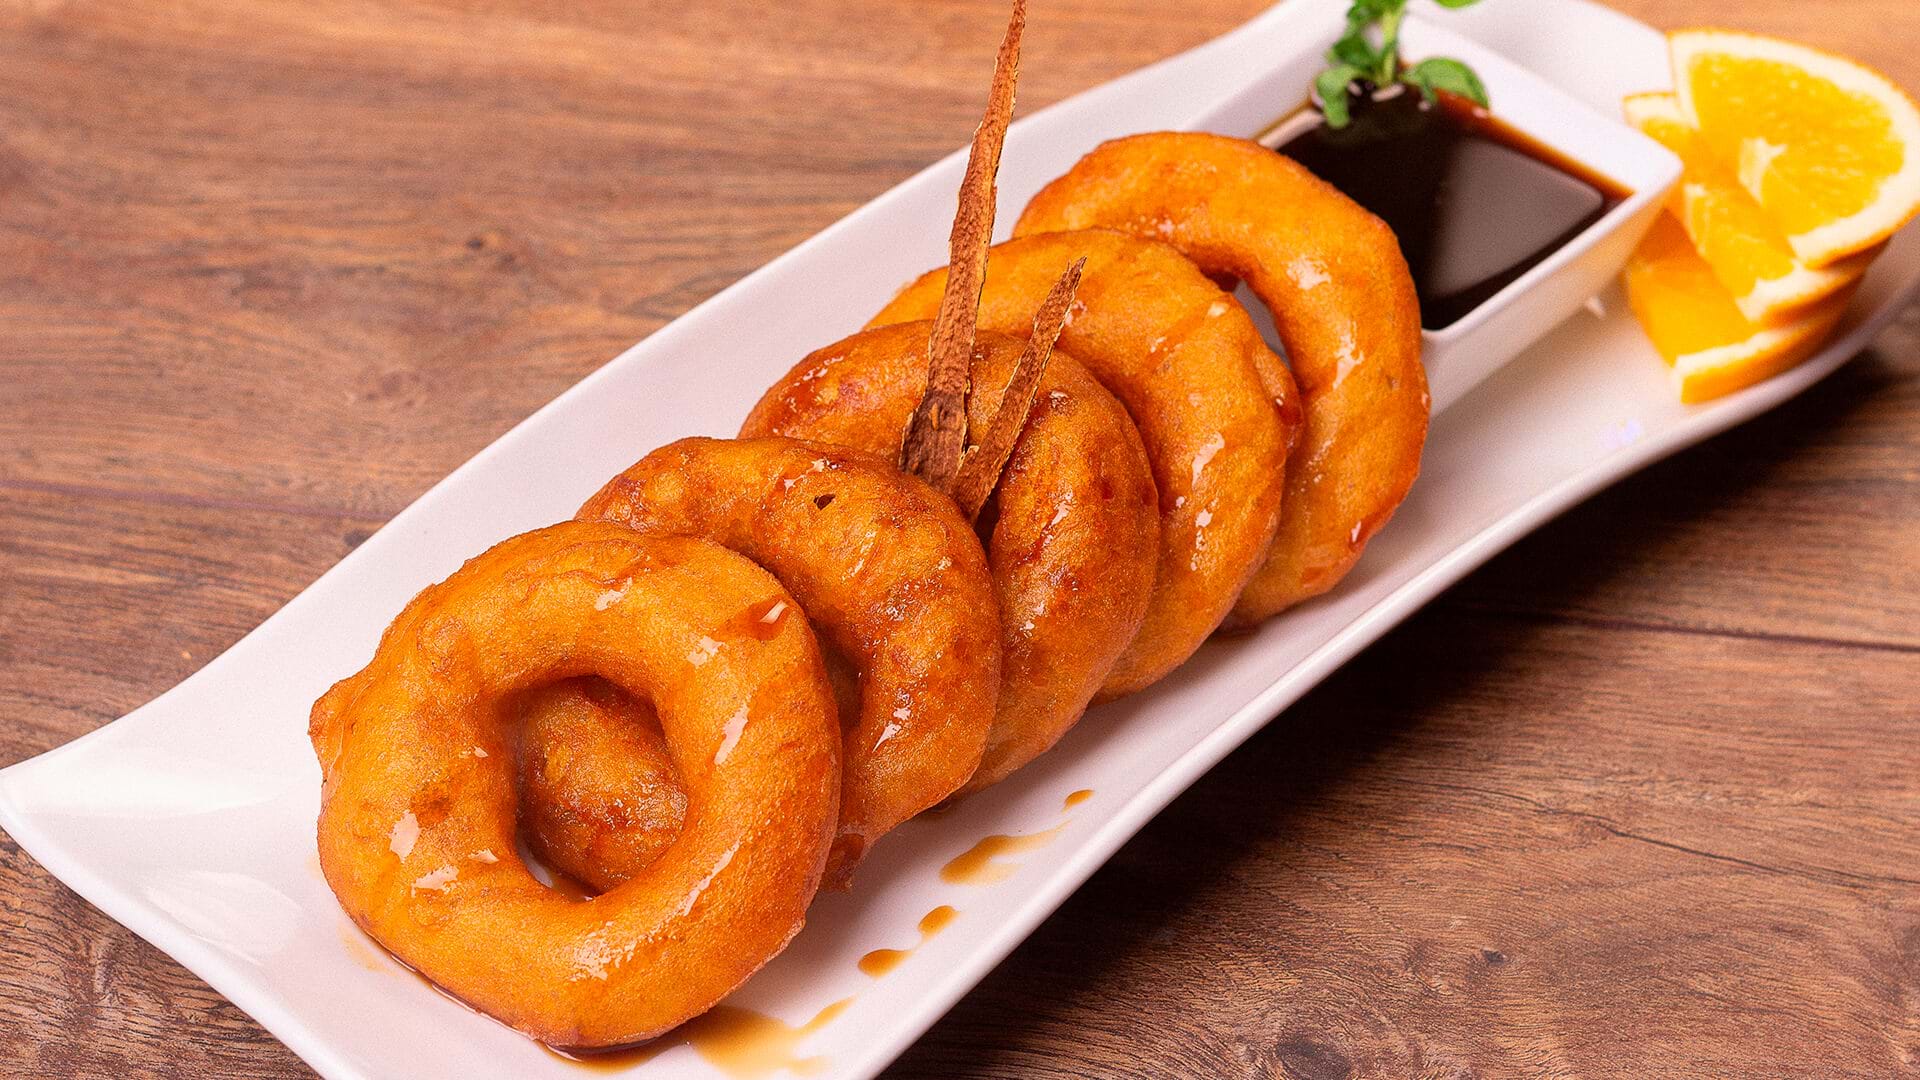 Picarones: preparation and history of this traditional Peruvian dessert